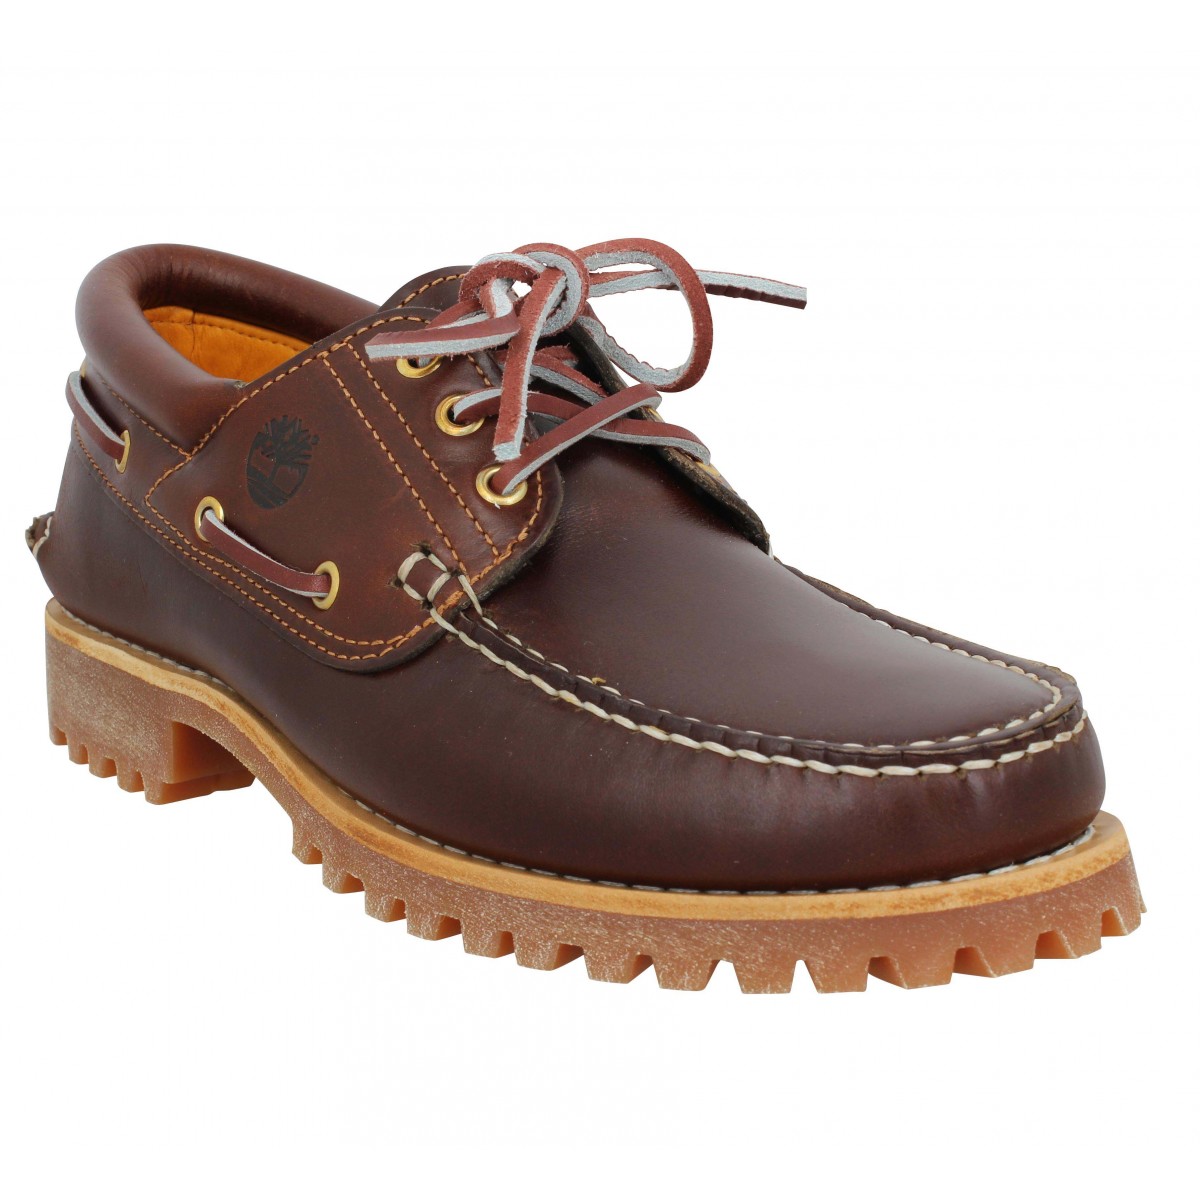 Chaussures bateaux TIMBERLAND Authentic Handsewn Boat Shoe cuir Homme Marron